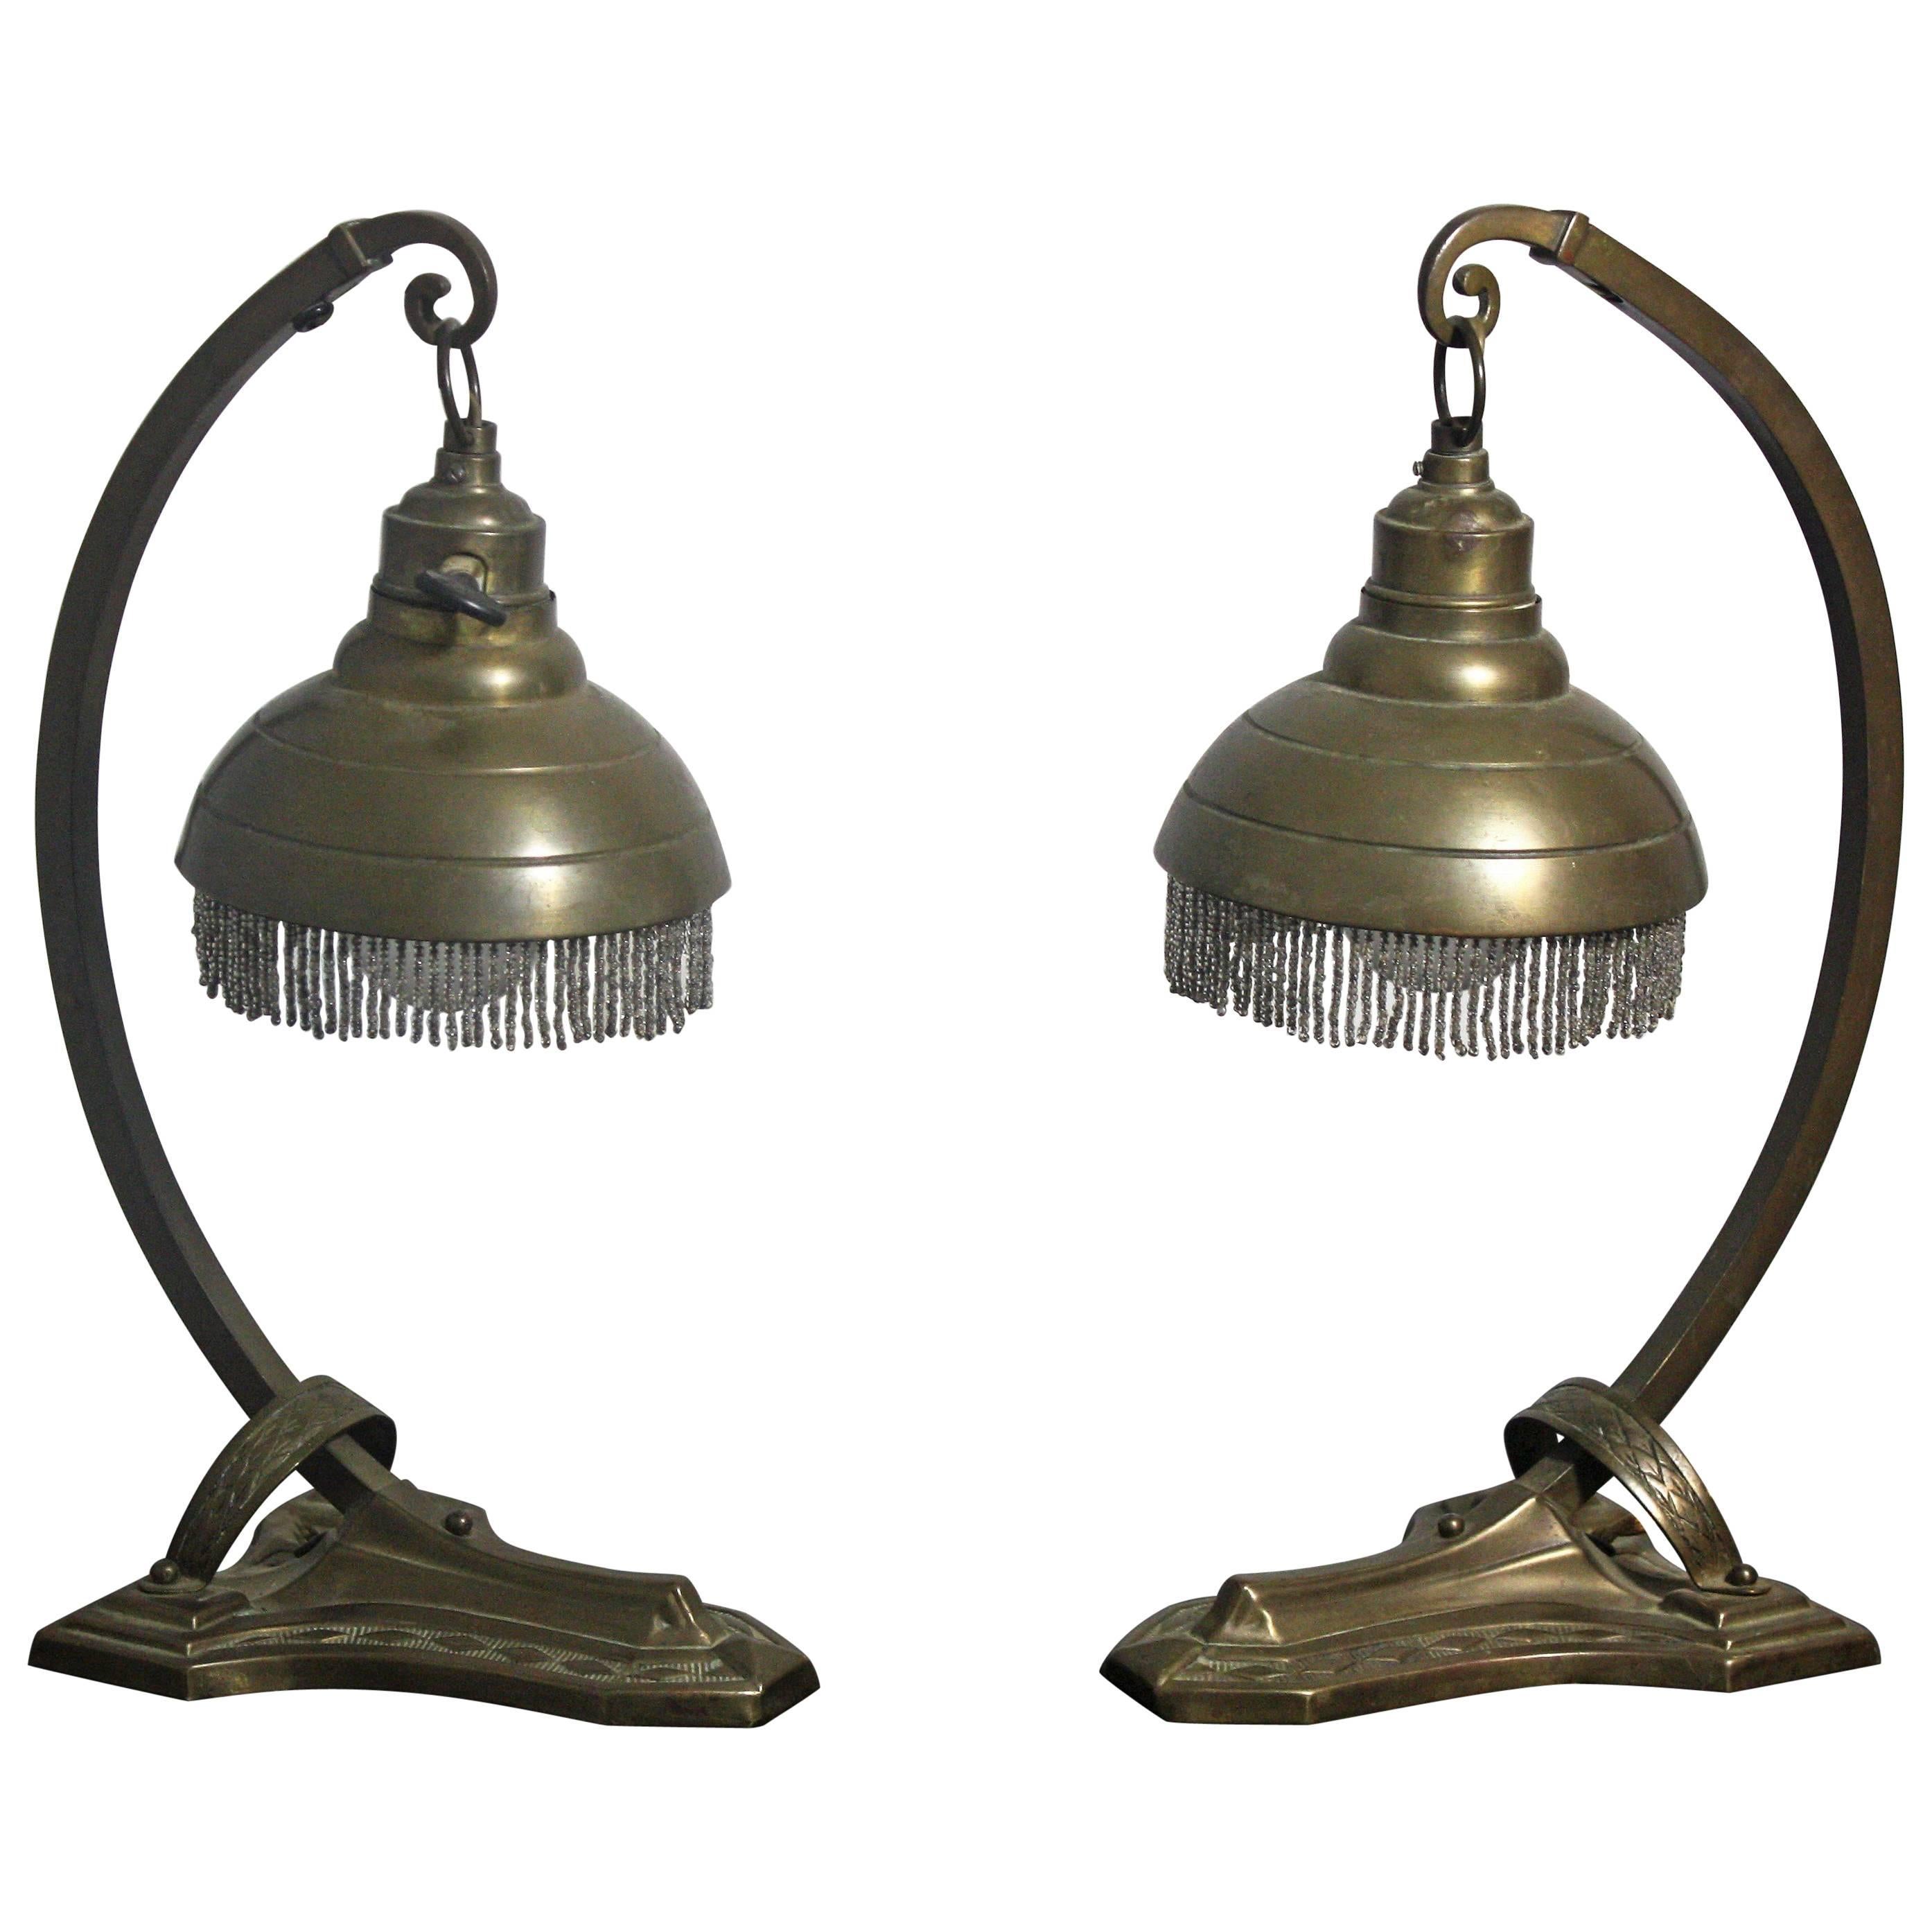 Pair of Art Nouveau Table or Wall Lamps, circa 1900